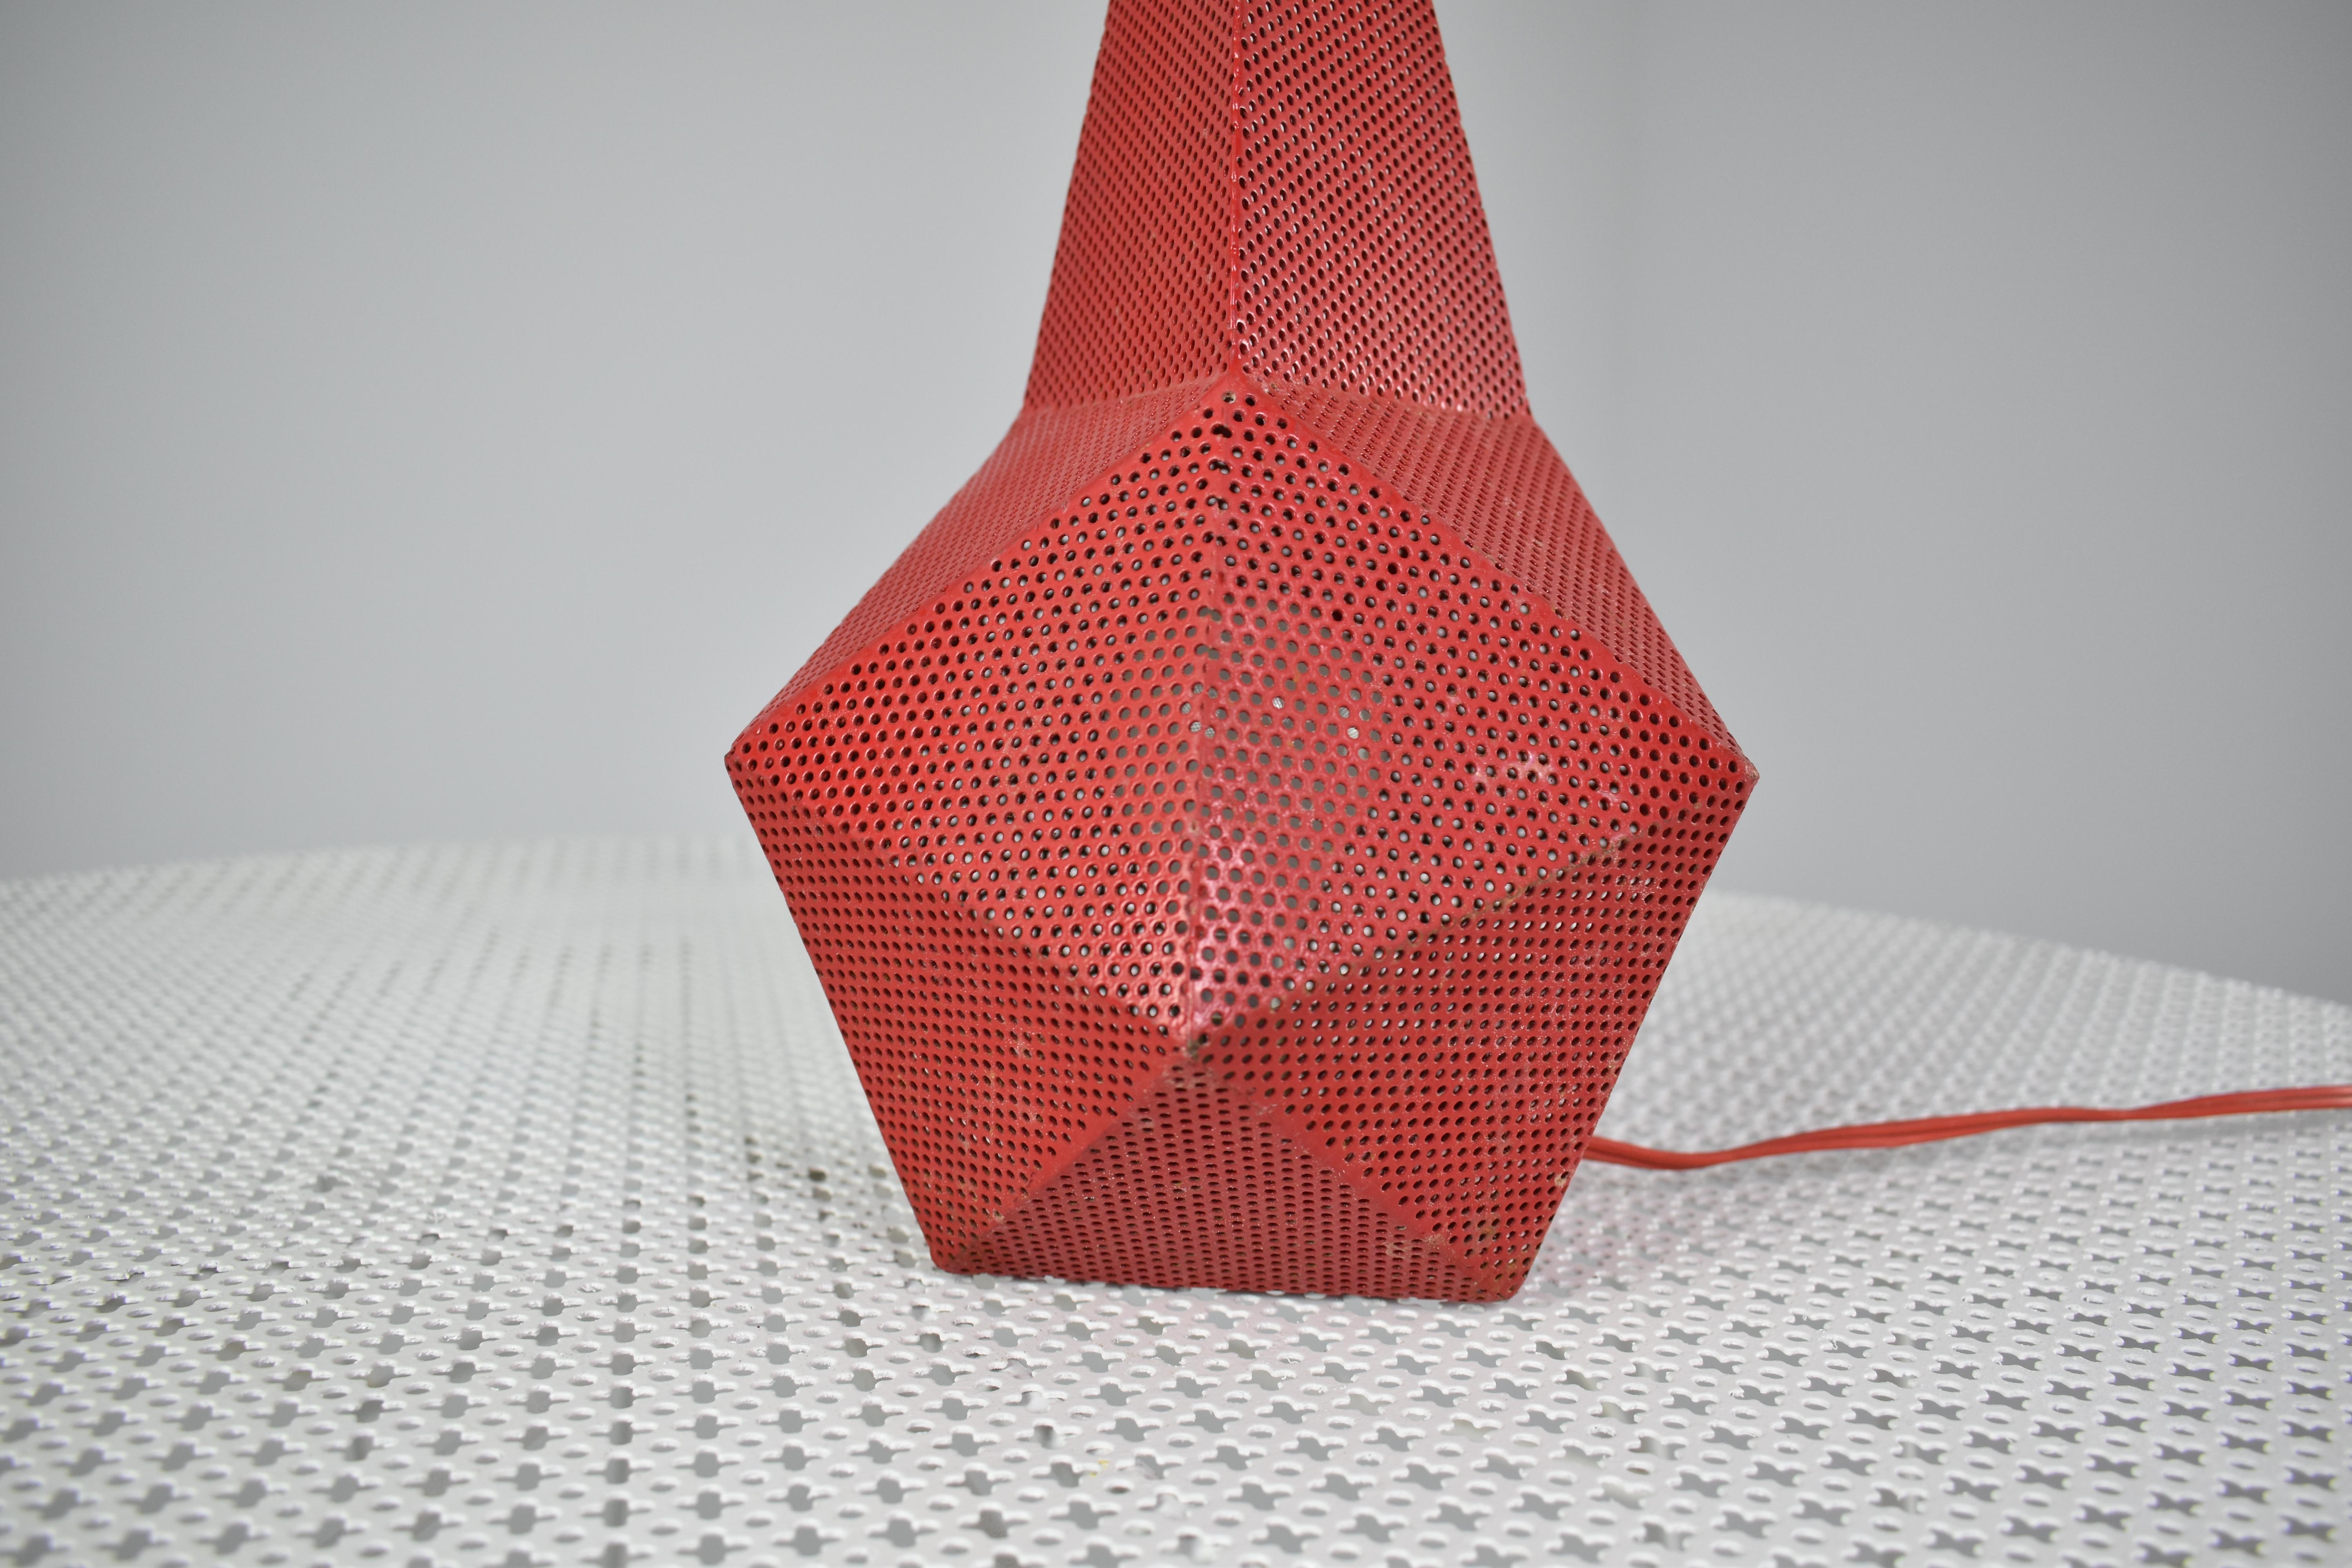 French Perforated Metal Table Lamp by Mathieu Matégot, 1950s For Sale 1